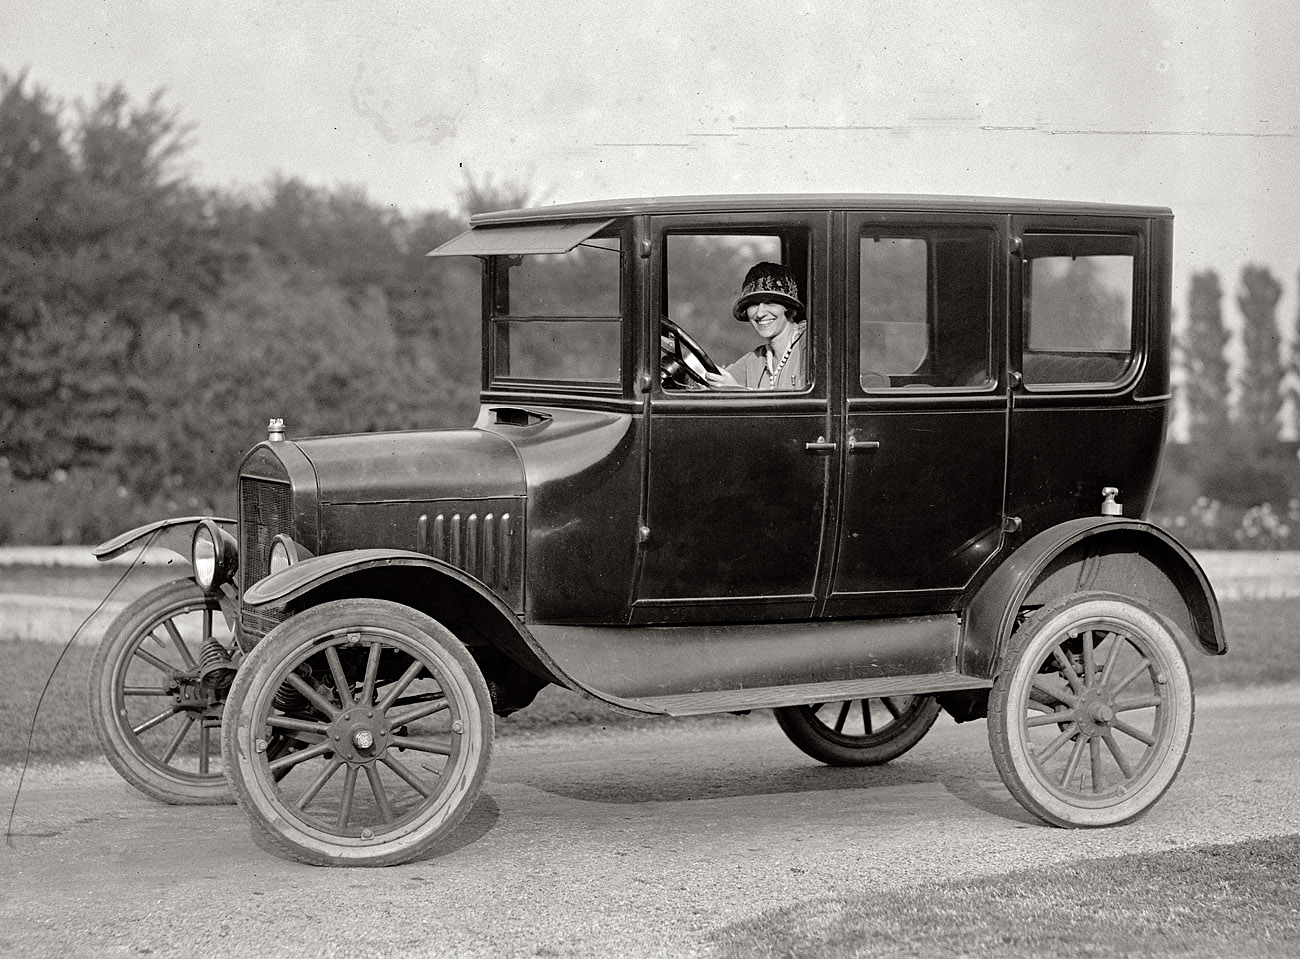 1924. Alexandria, Virginia, schoolteacher Elizabeth Ramey and her car, a Model T Ford. View full size. National Photo Company Collection glass negative.